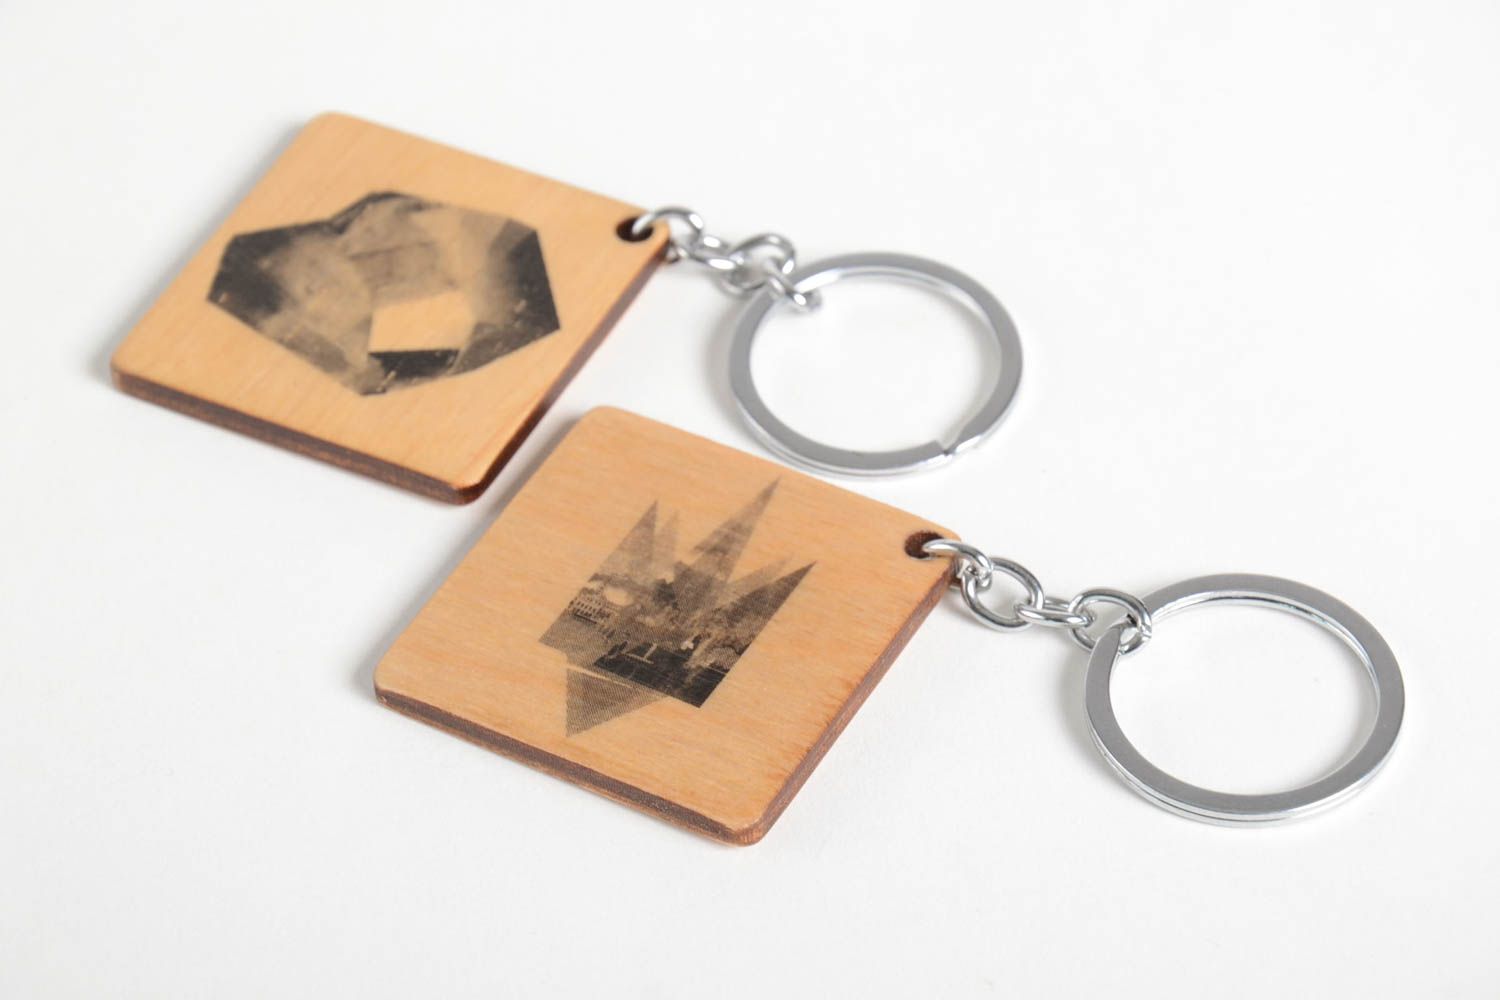 Handmade keychains set of 2 products wooden souvenir unusual gift ideas photo 4